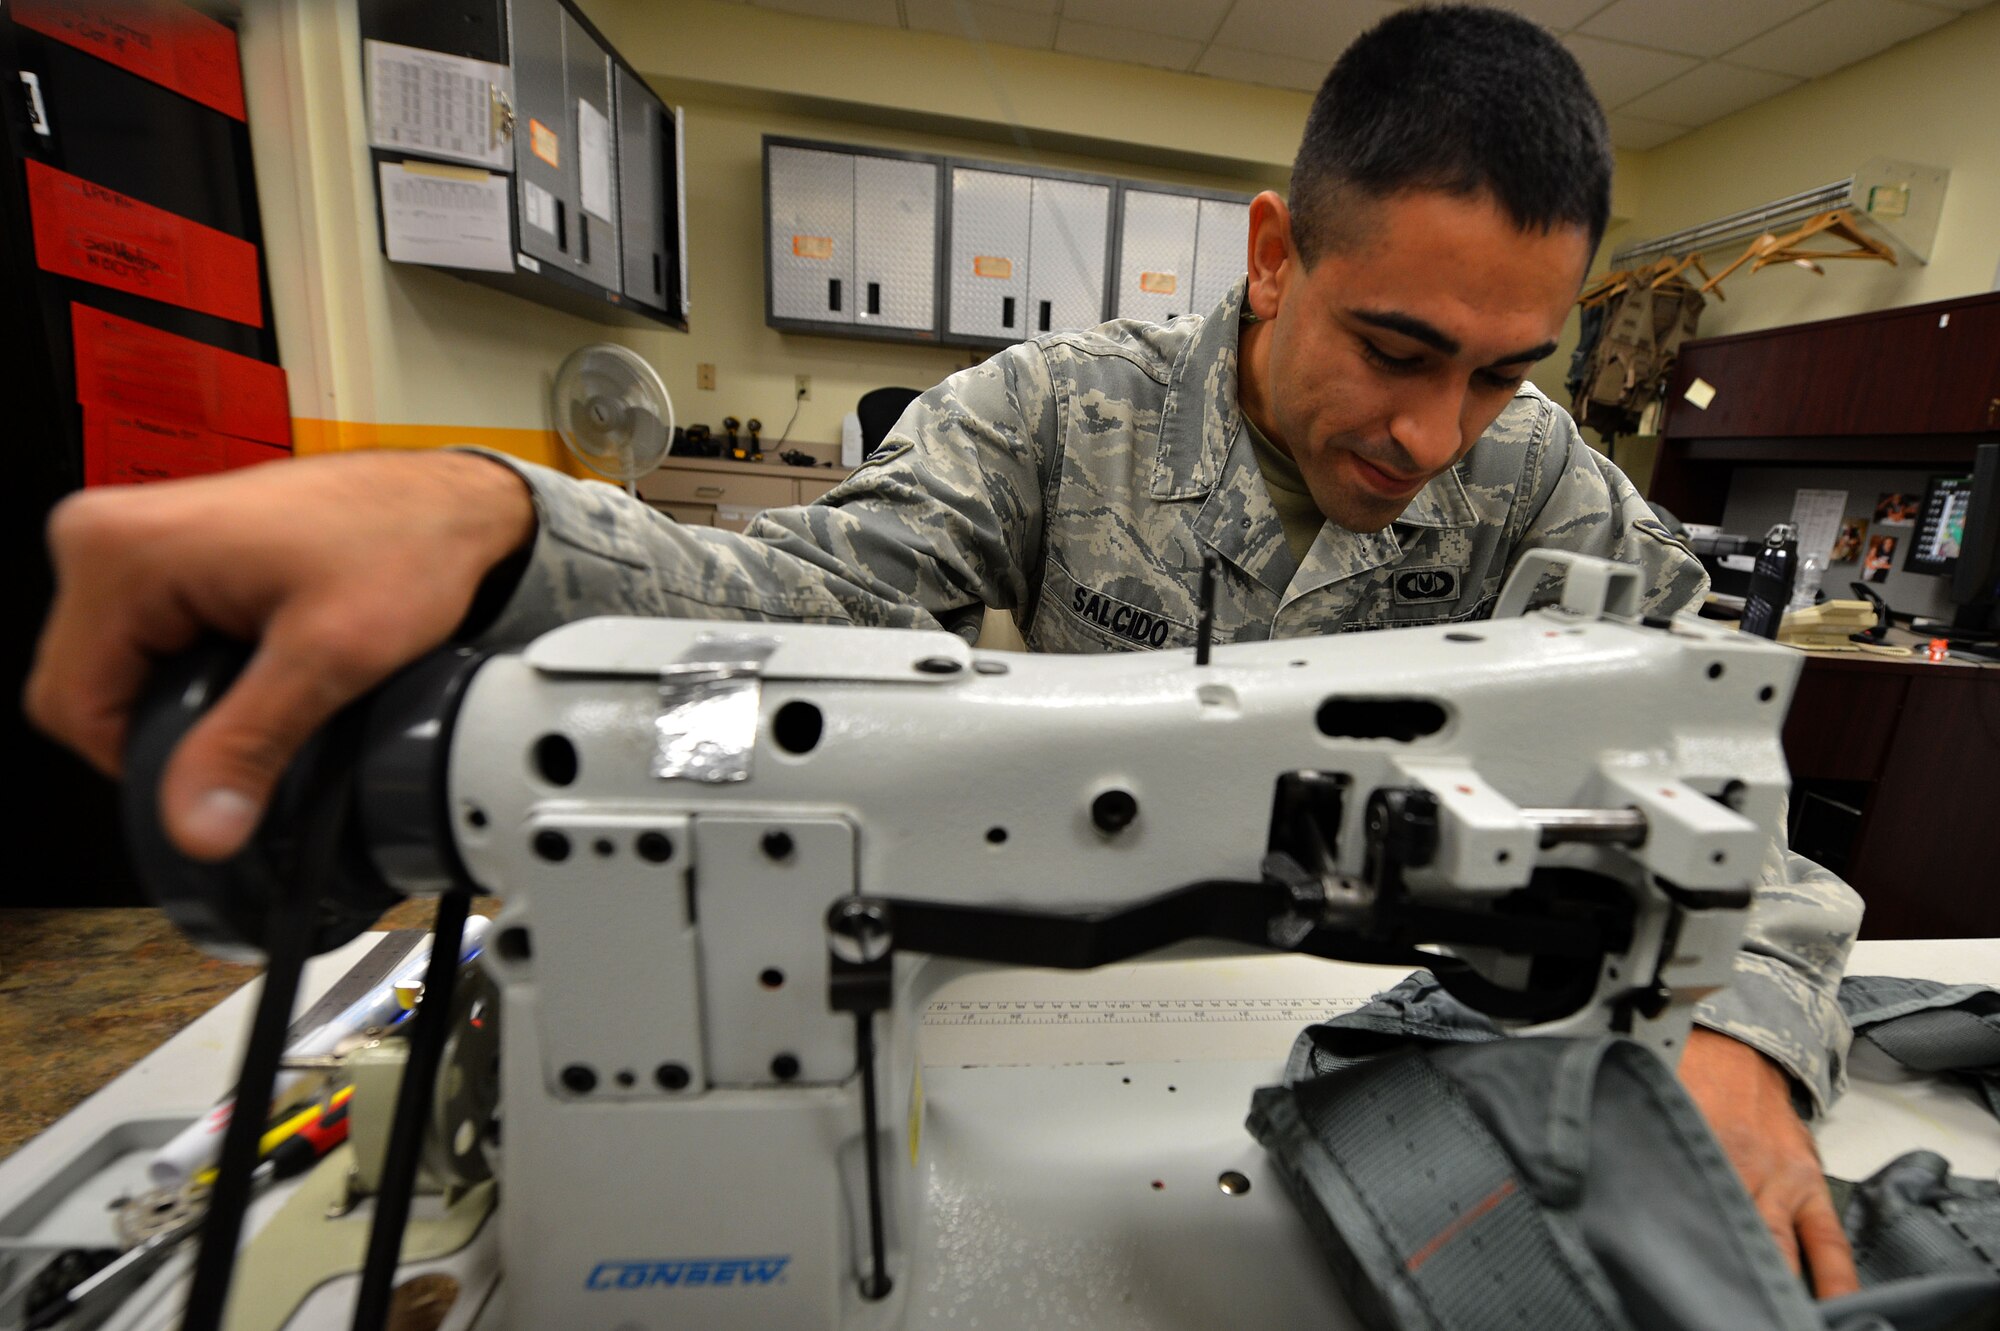 U.S. Air Force Airman 1st Class Jerry Salcido, 20th Operations Support Squadron aircrew flight equipment specialist, sews a PCU-15B/P torso harness at Shaw Air Force Base, S.C., Oct. 21, 2015. AFE airmen inspect, maintain, and service all aircrew’s gear to ensure it is in working order and has no discrepencies. (U.S. Air Force photo by Senior Airman Michael Cossaboom)